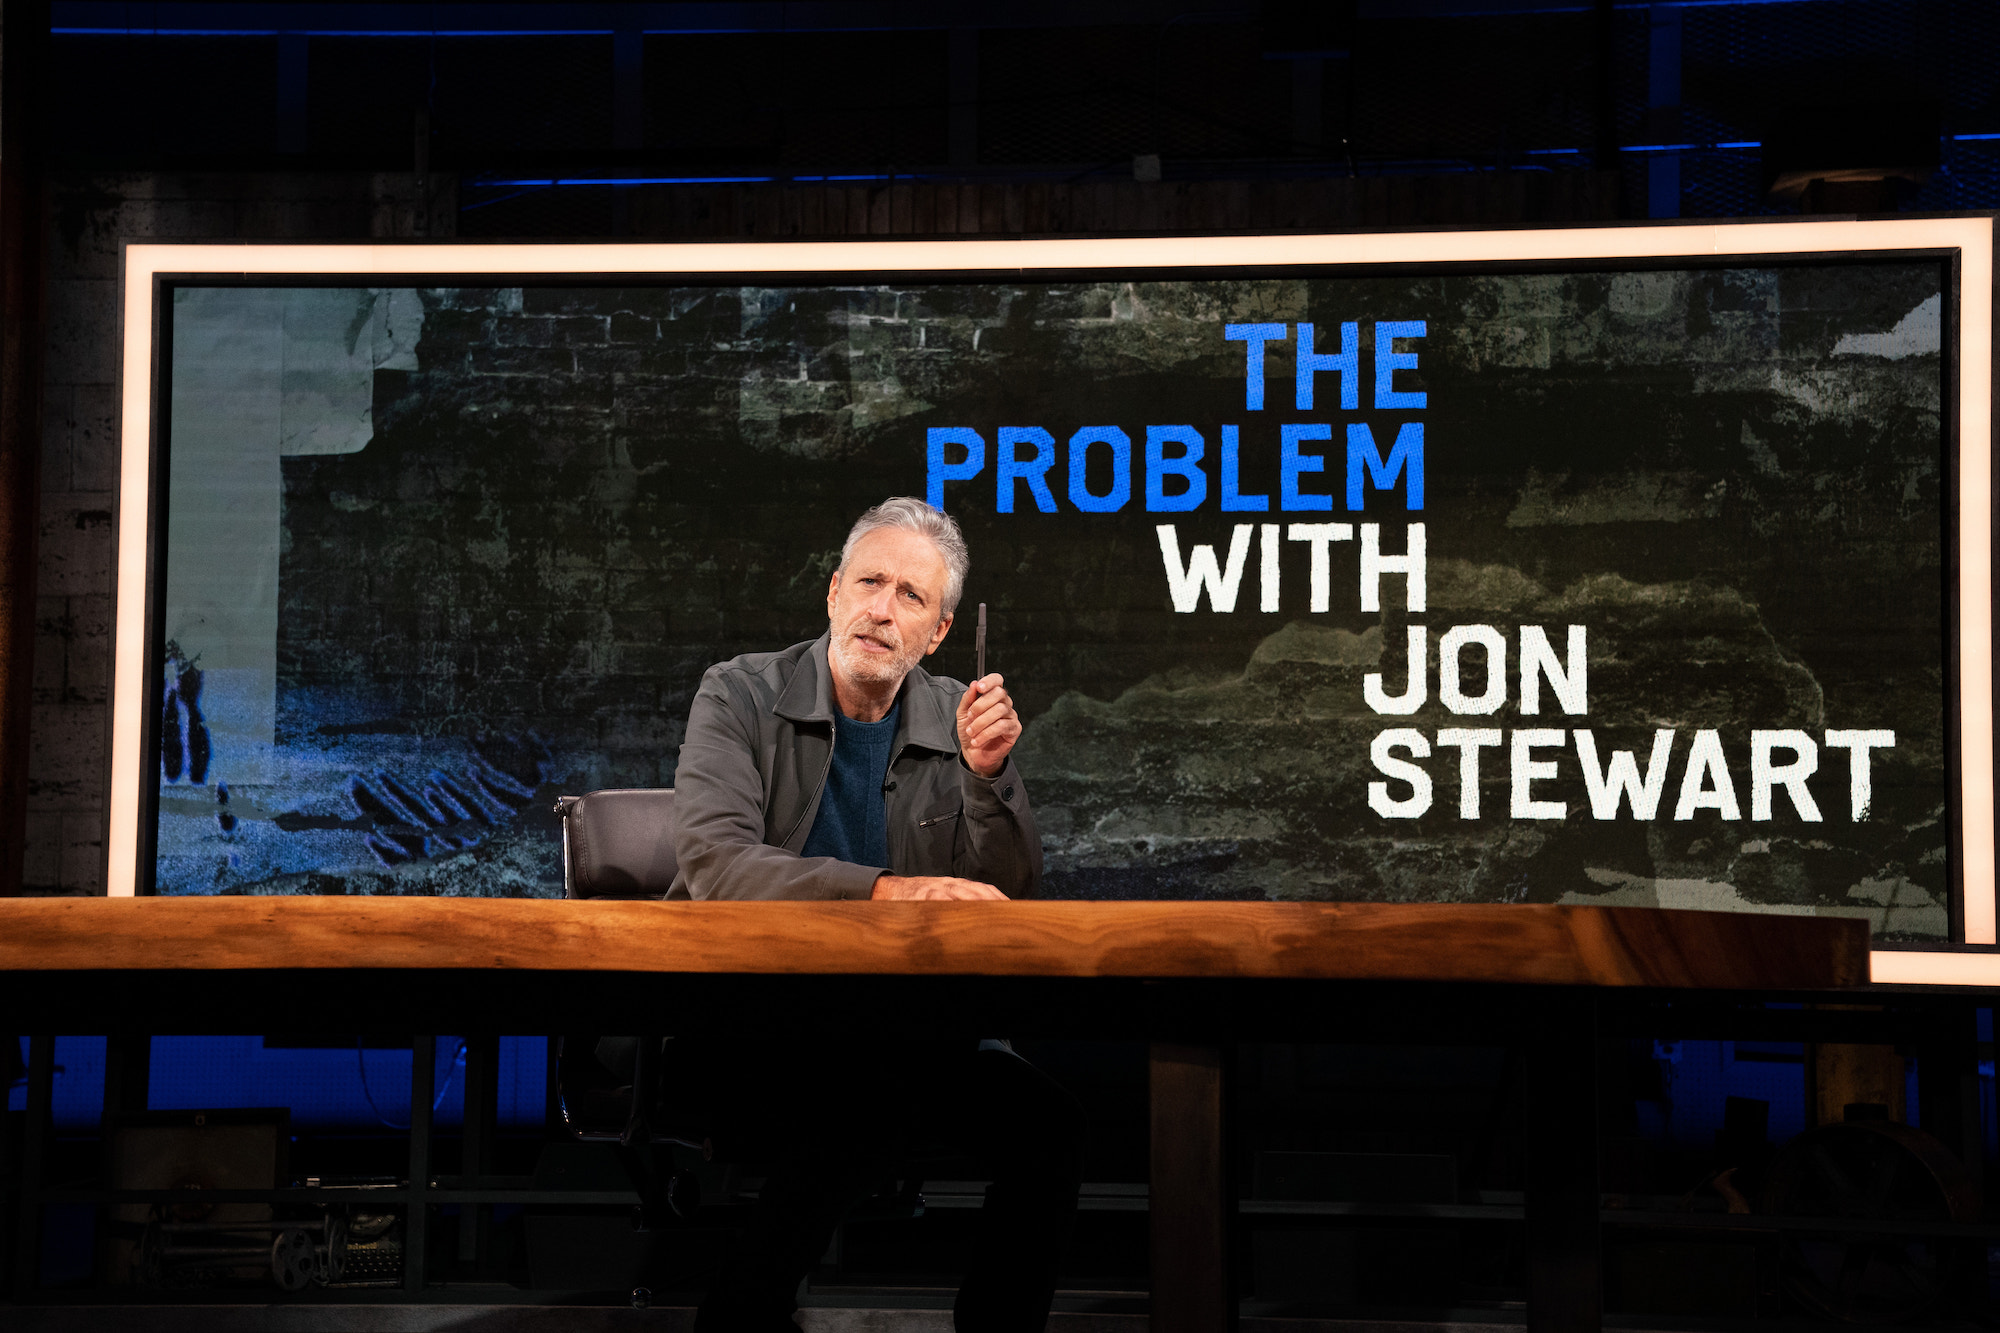 Photo 9 in 'The Problem with Jon Stewart' gallery showcasing lighting design by Mike Baldassari of Mike-O-Matic Industries LLC